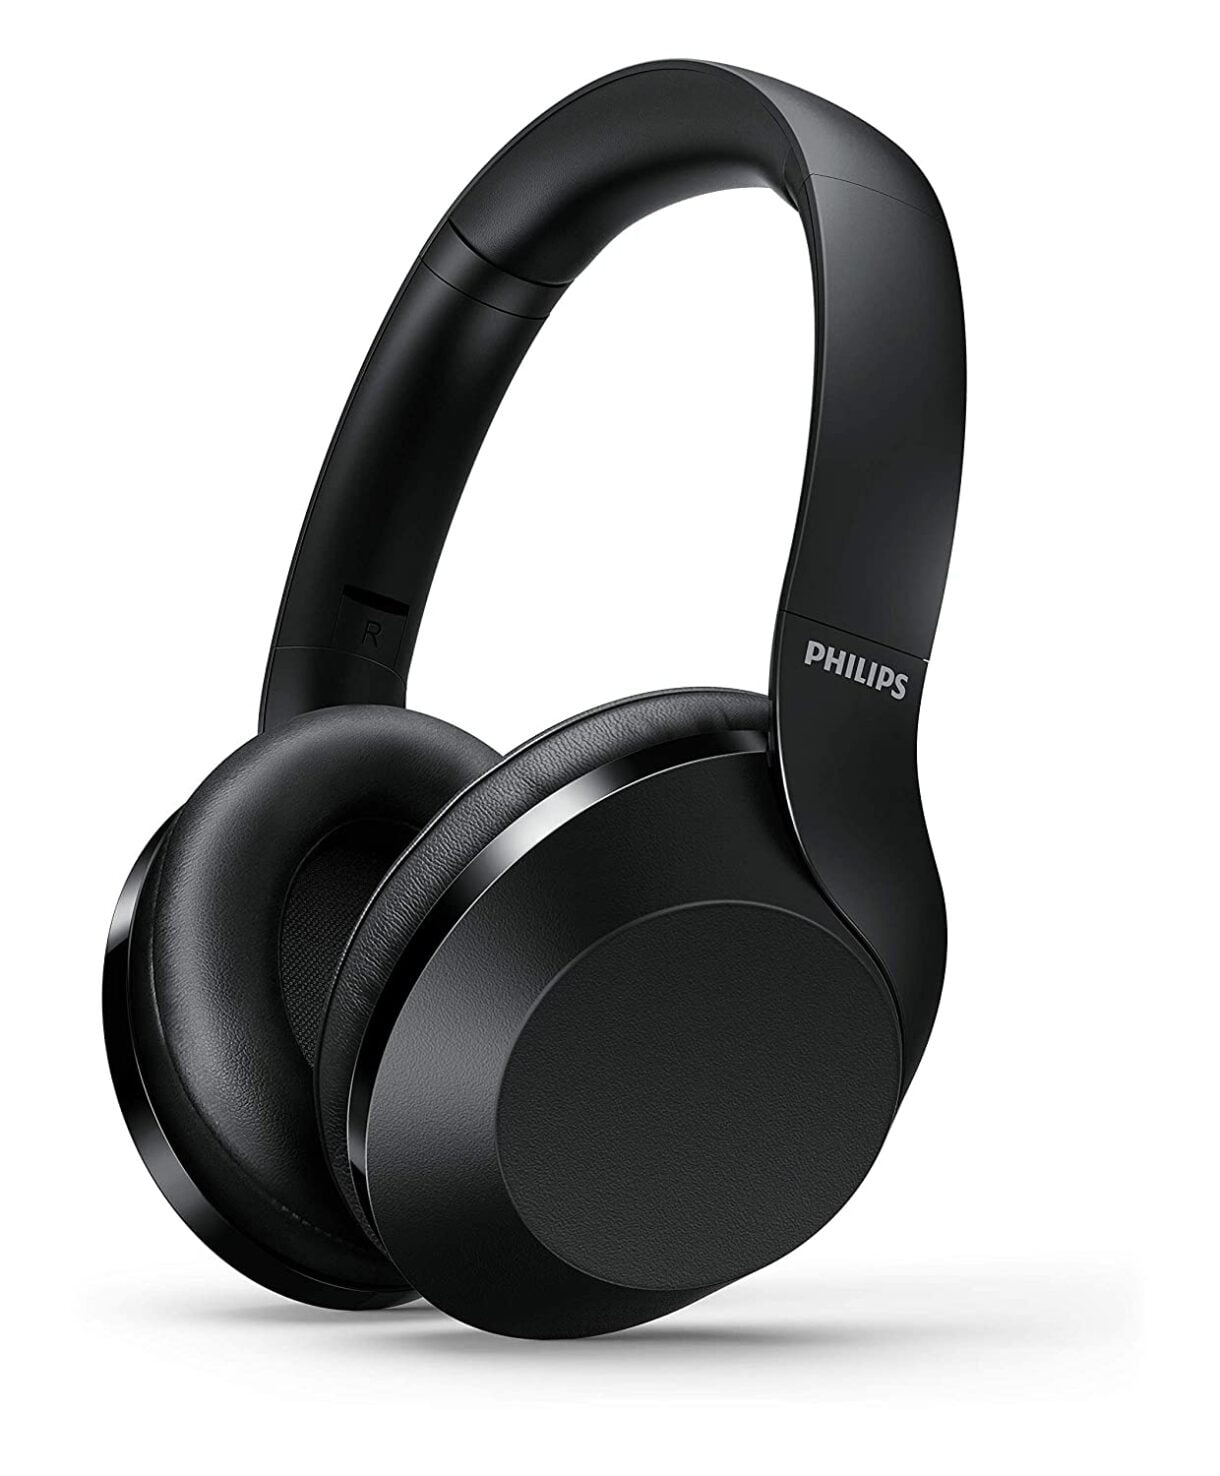 Philips Performance TAPH802BK Hi-Res Audio Bluetooth 5.0 Over-Ear Headphones with Quick Charge, 30 Hour Play Time, Multi-Function Button, 40 mm Drivers and Built-in Mic with Echo Cancellation